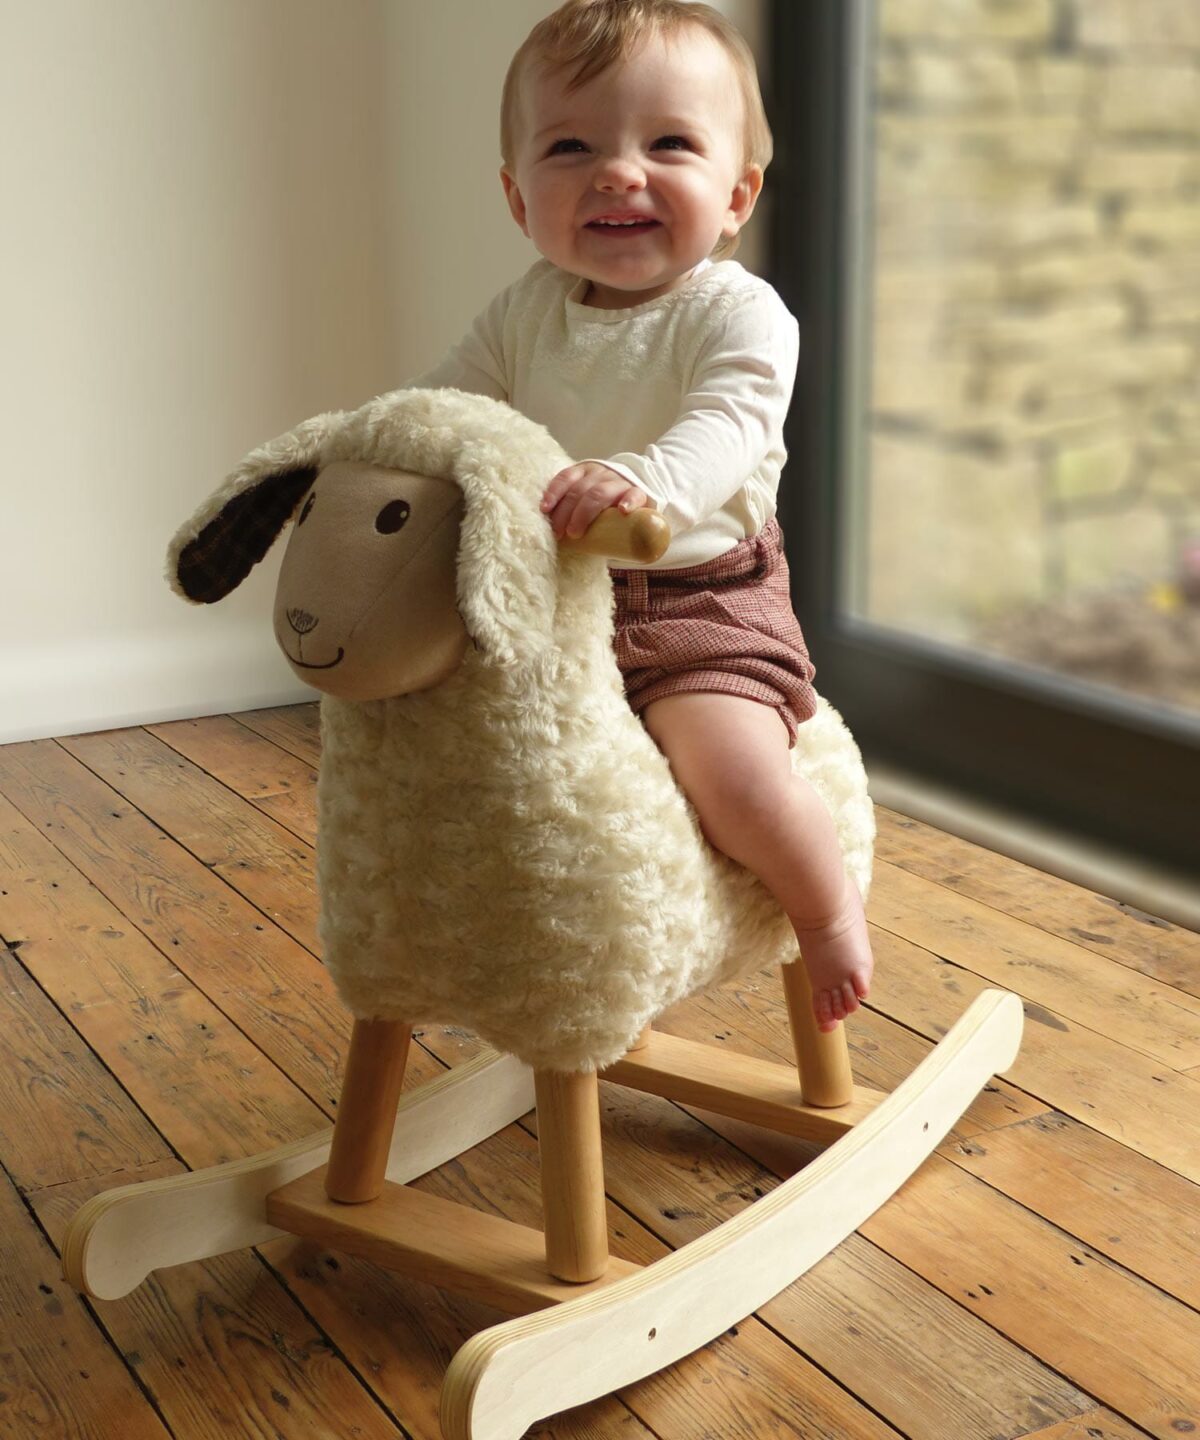 Baby Boy riding on Lambert Rocking Sheep with sturdy wooden frame